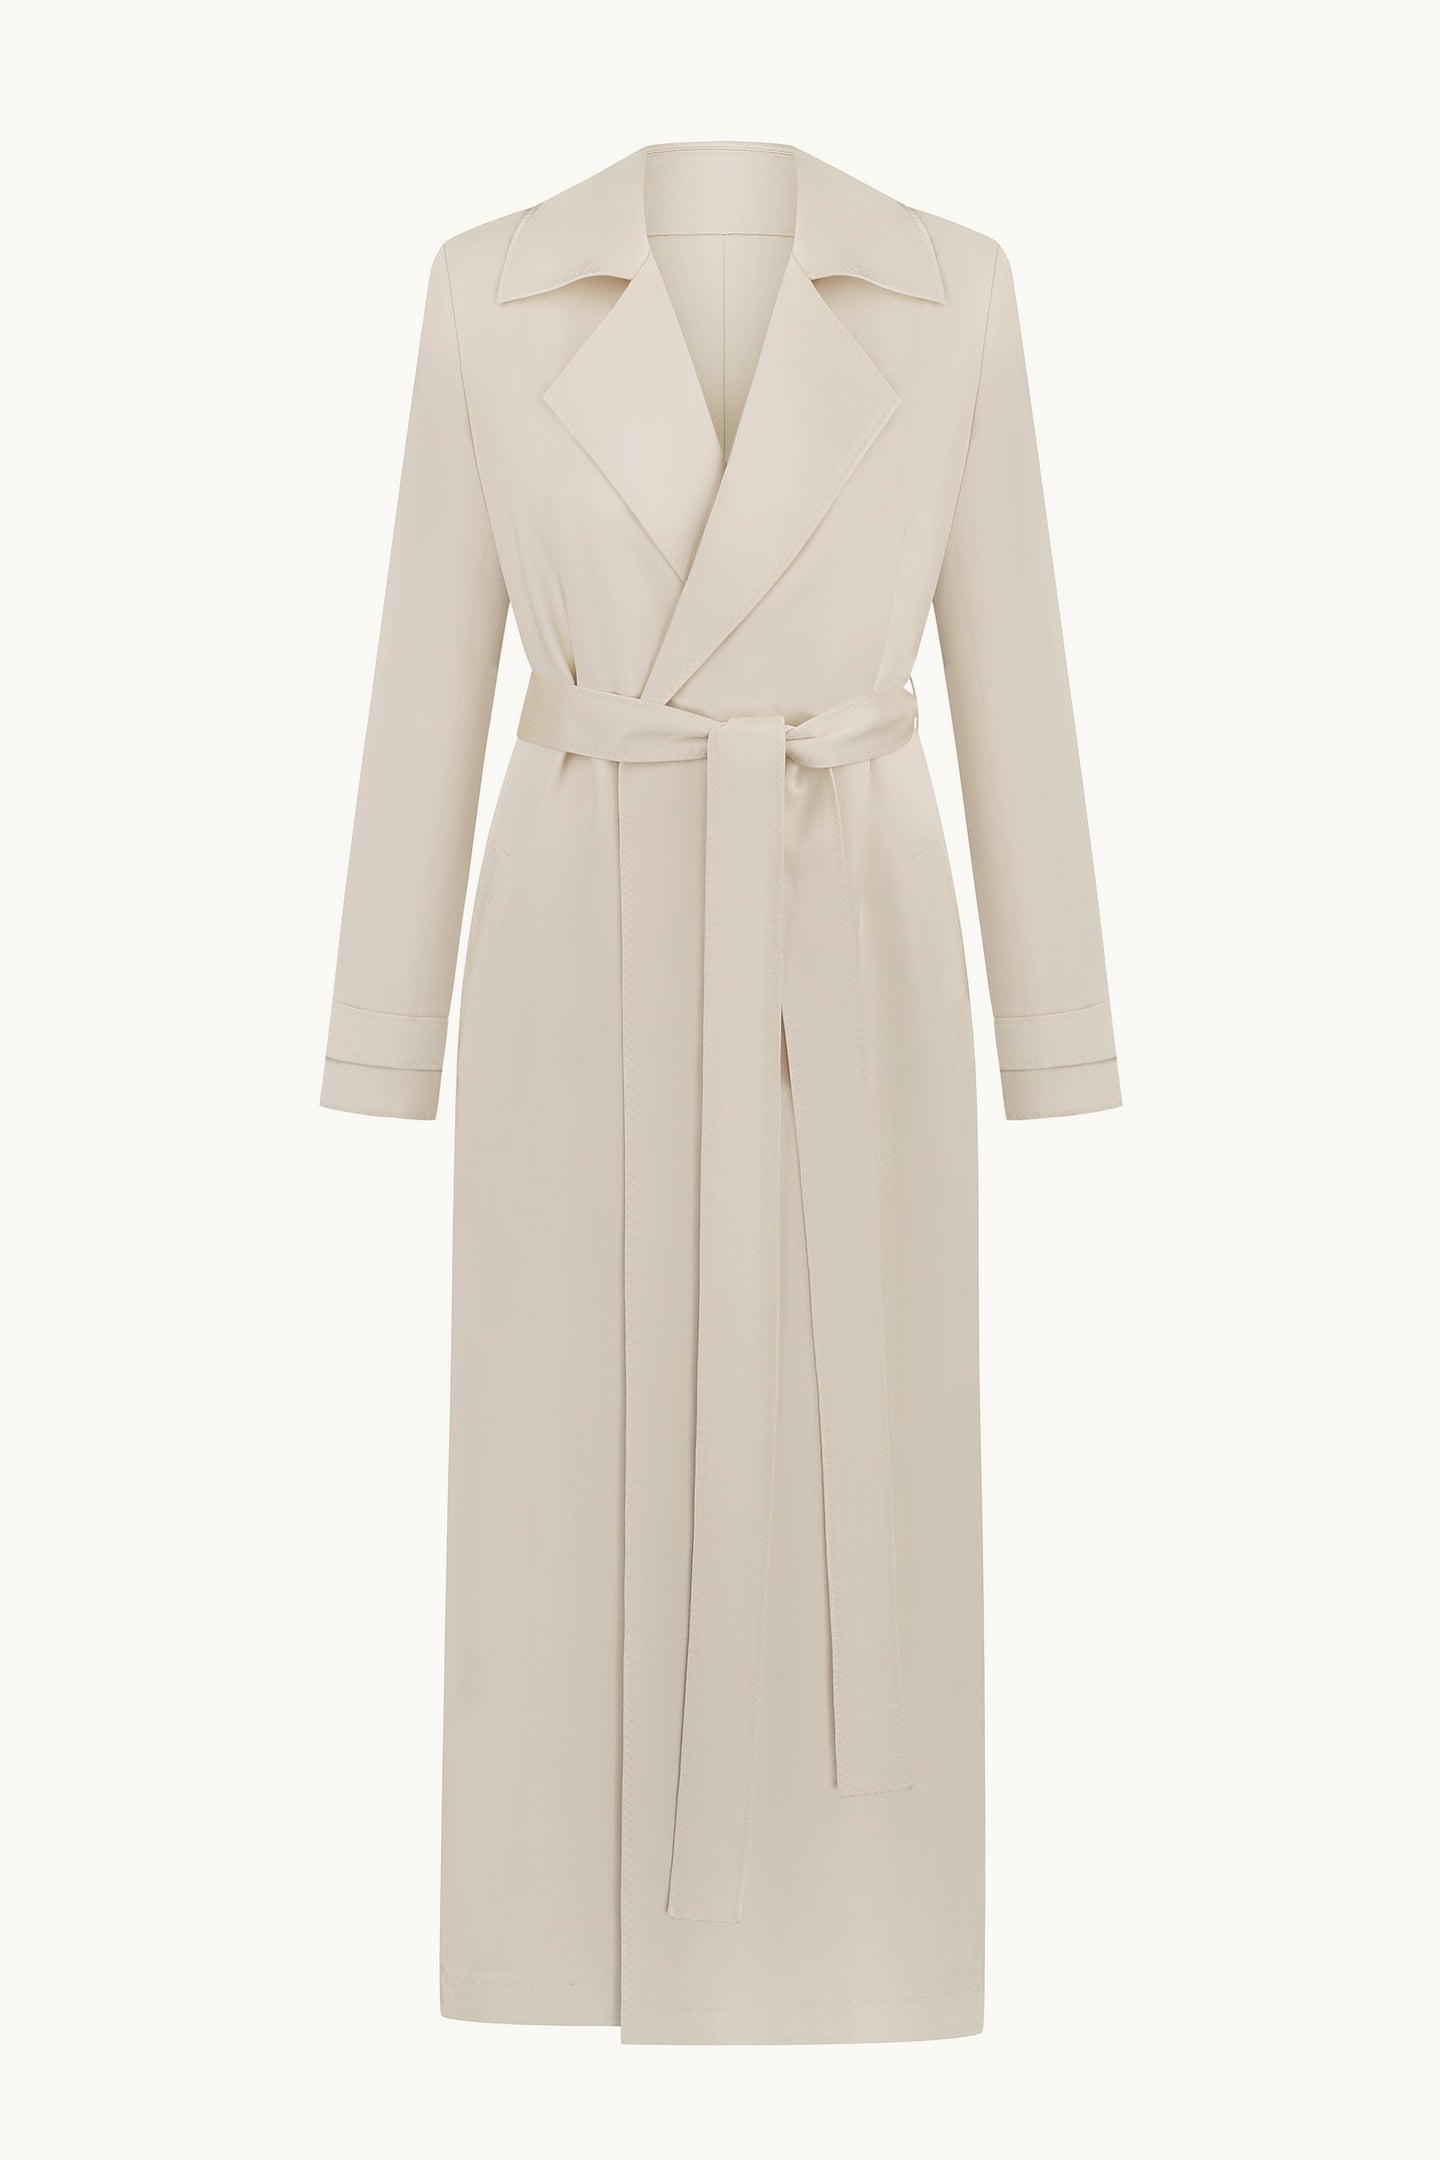 Nomy ivory trench front view